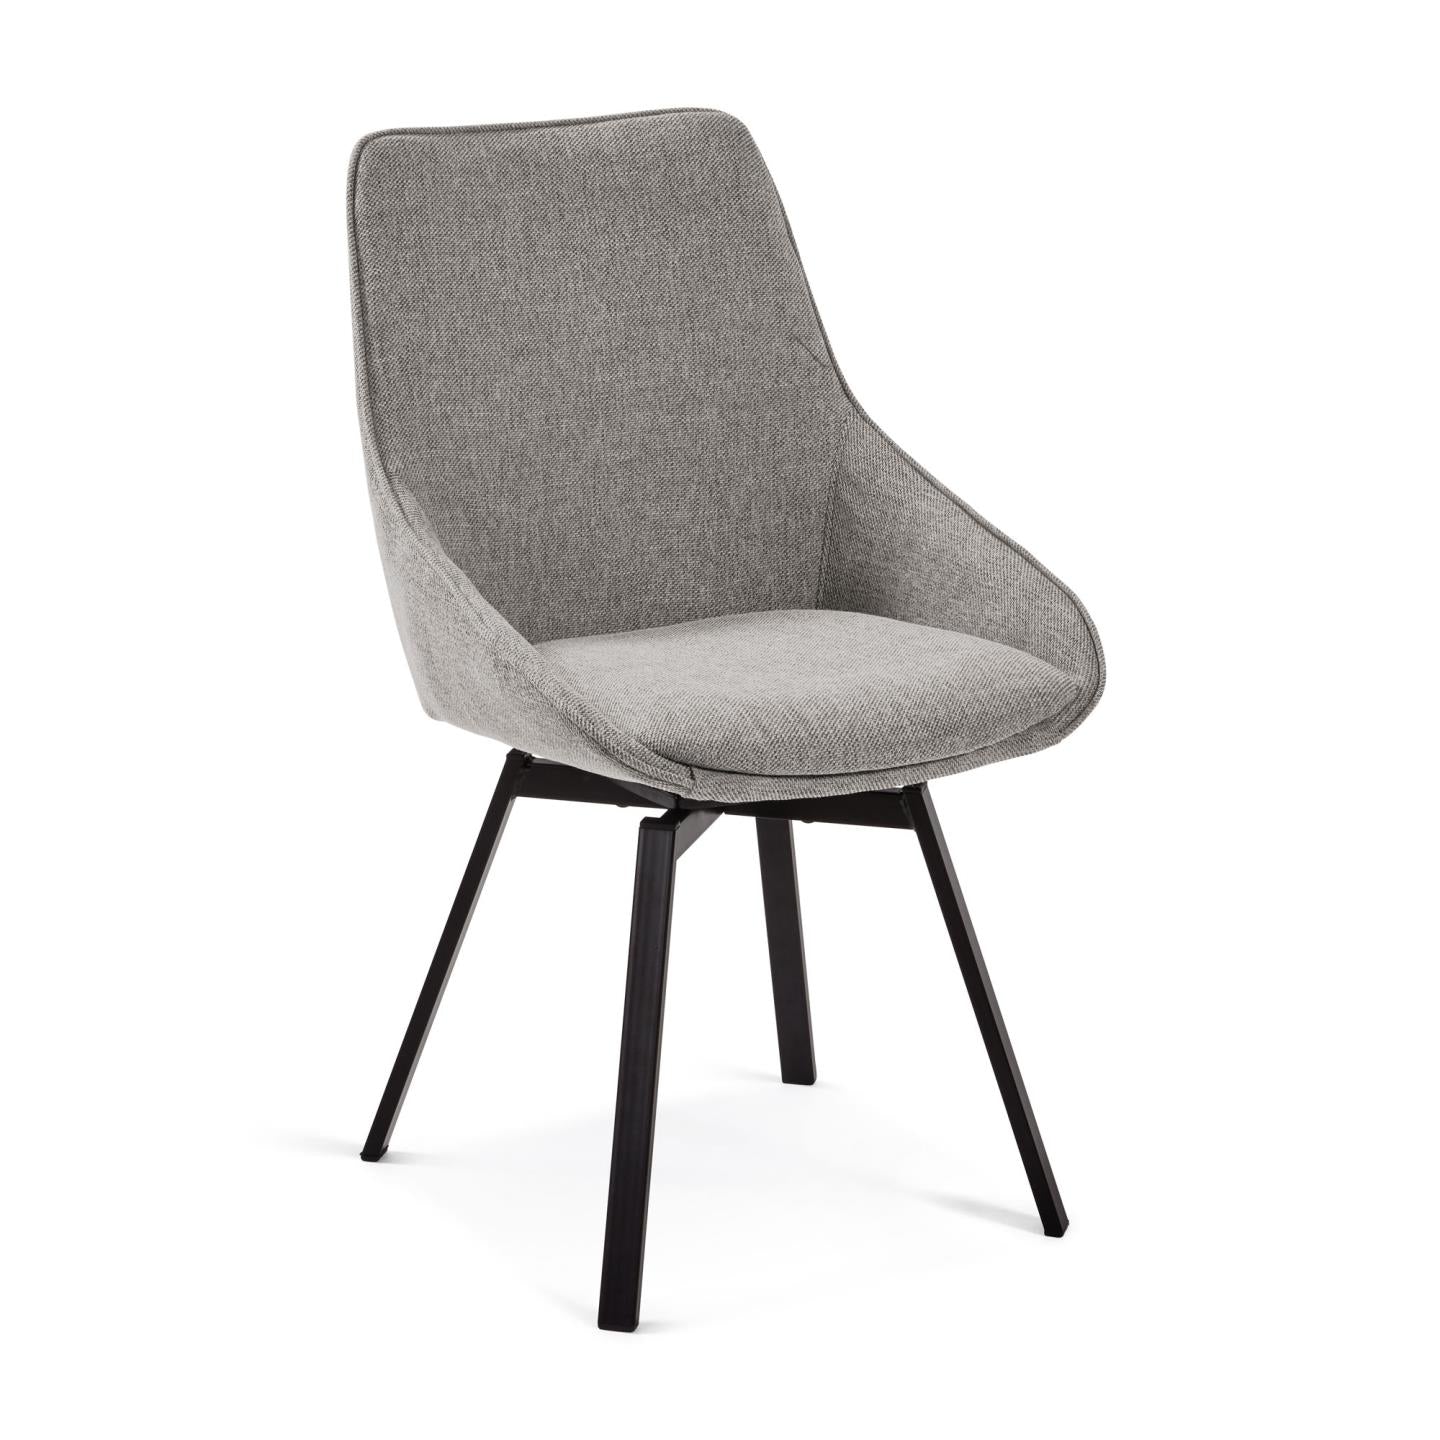 Jenna light grey swivel chair with steel legs with black finish